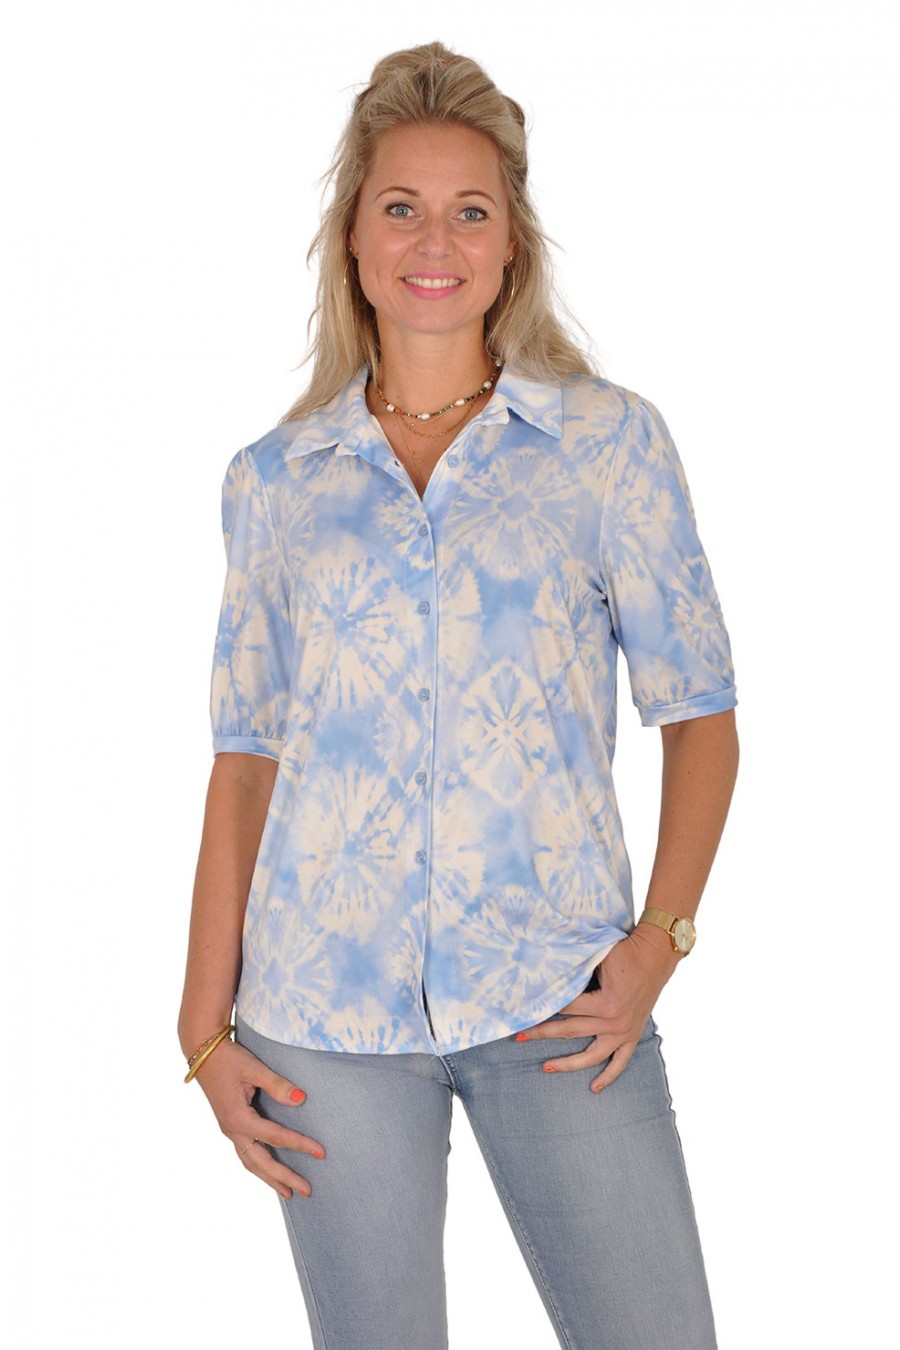 Ultrasoft blouse Tie dye pearl blue New Collection